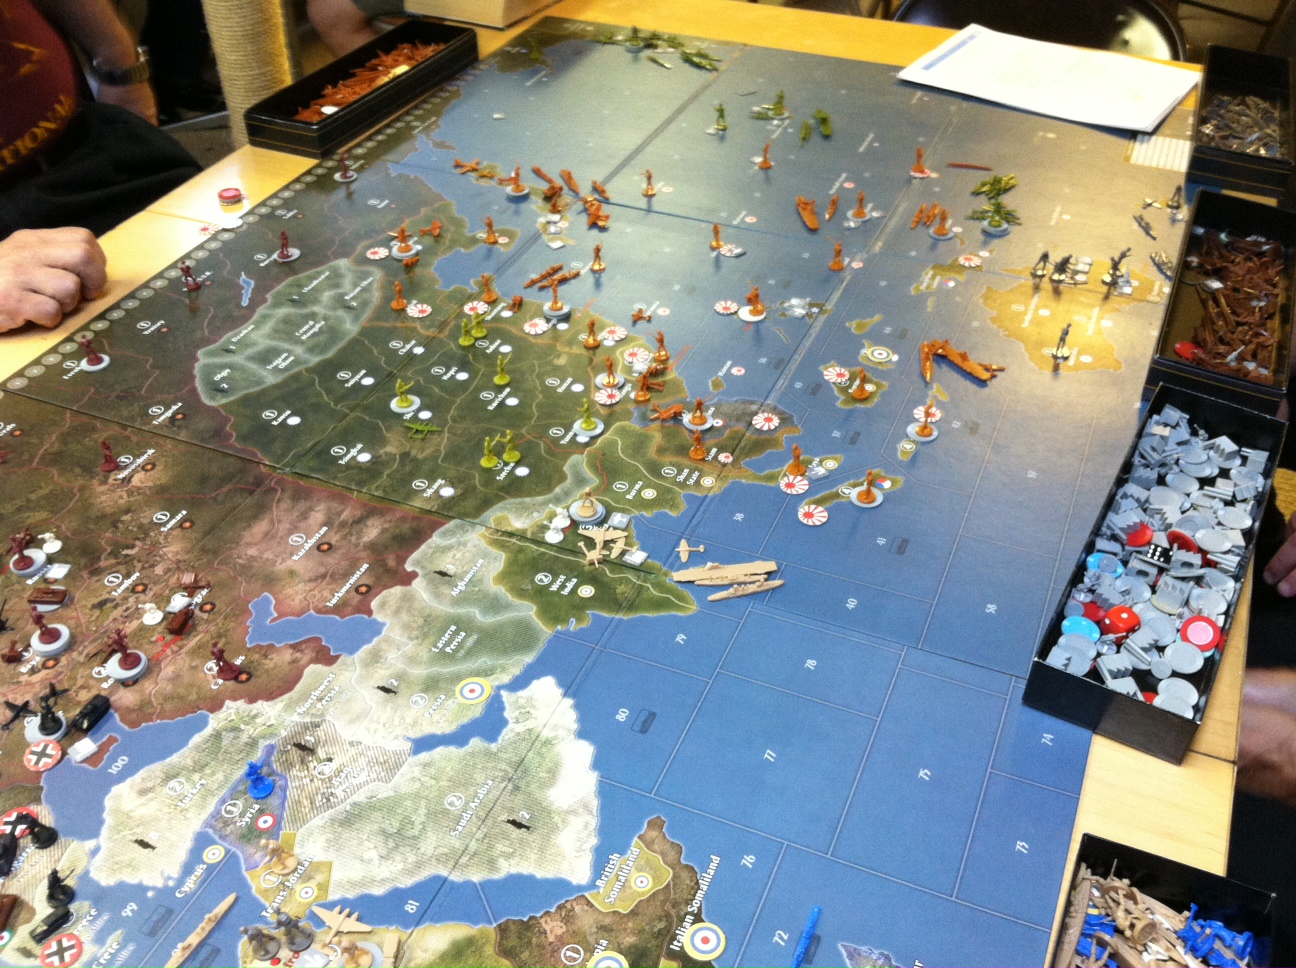 axis and allies online